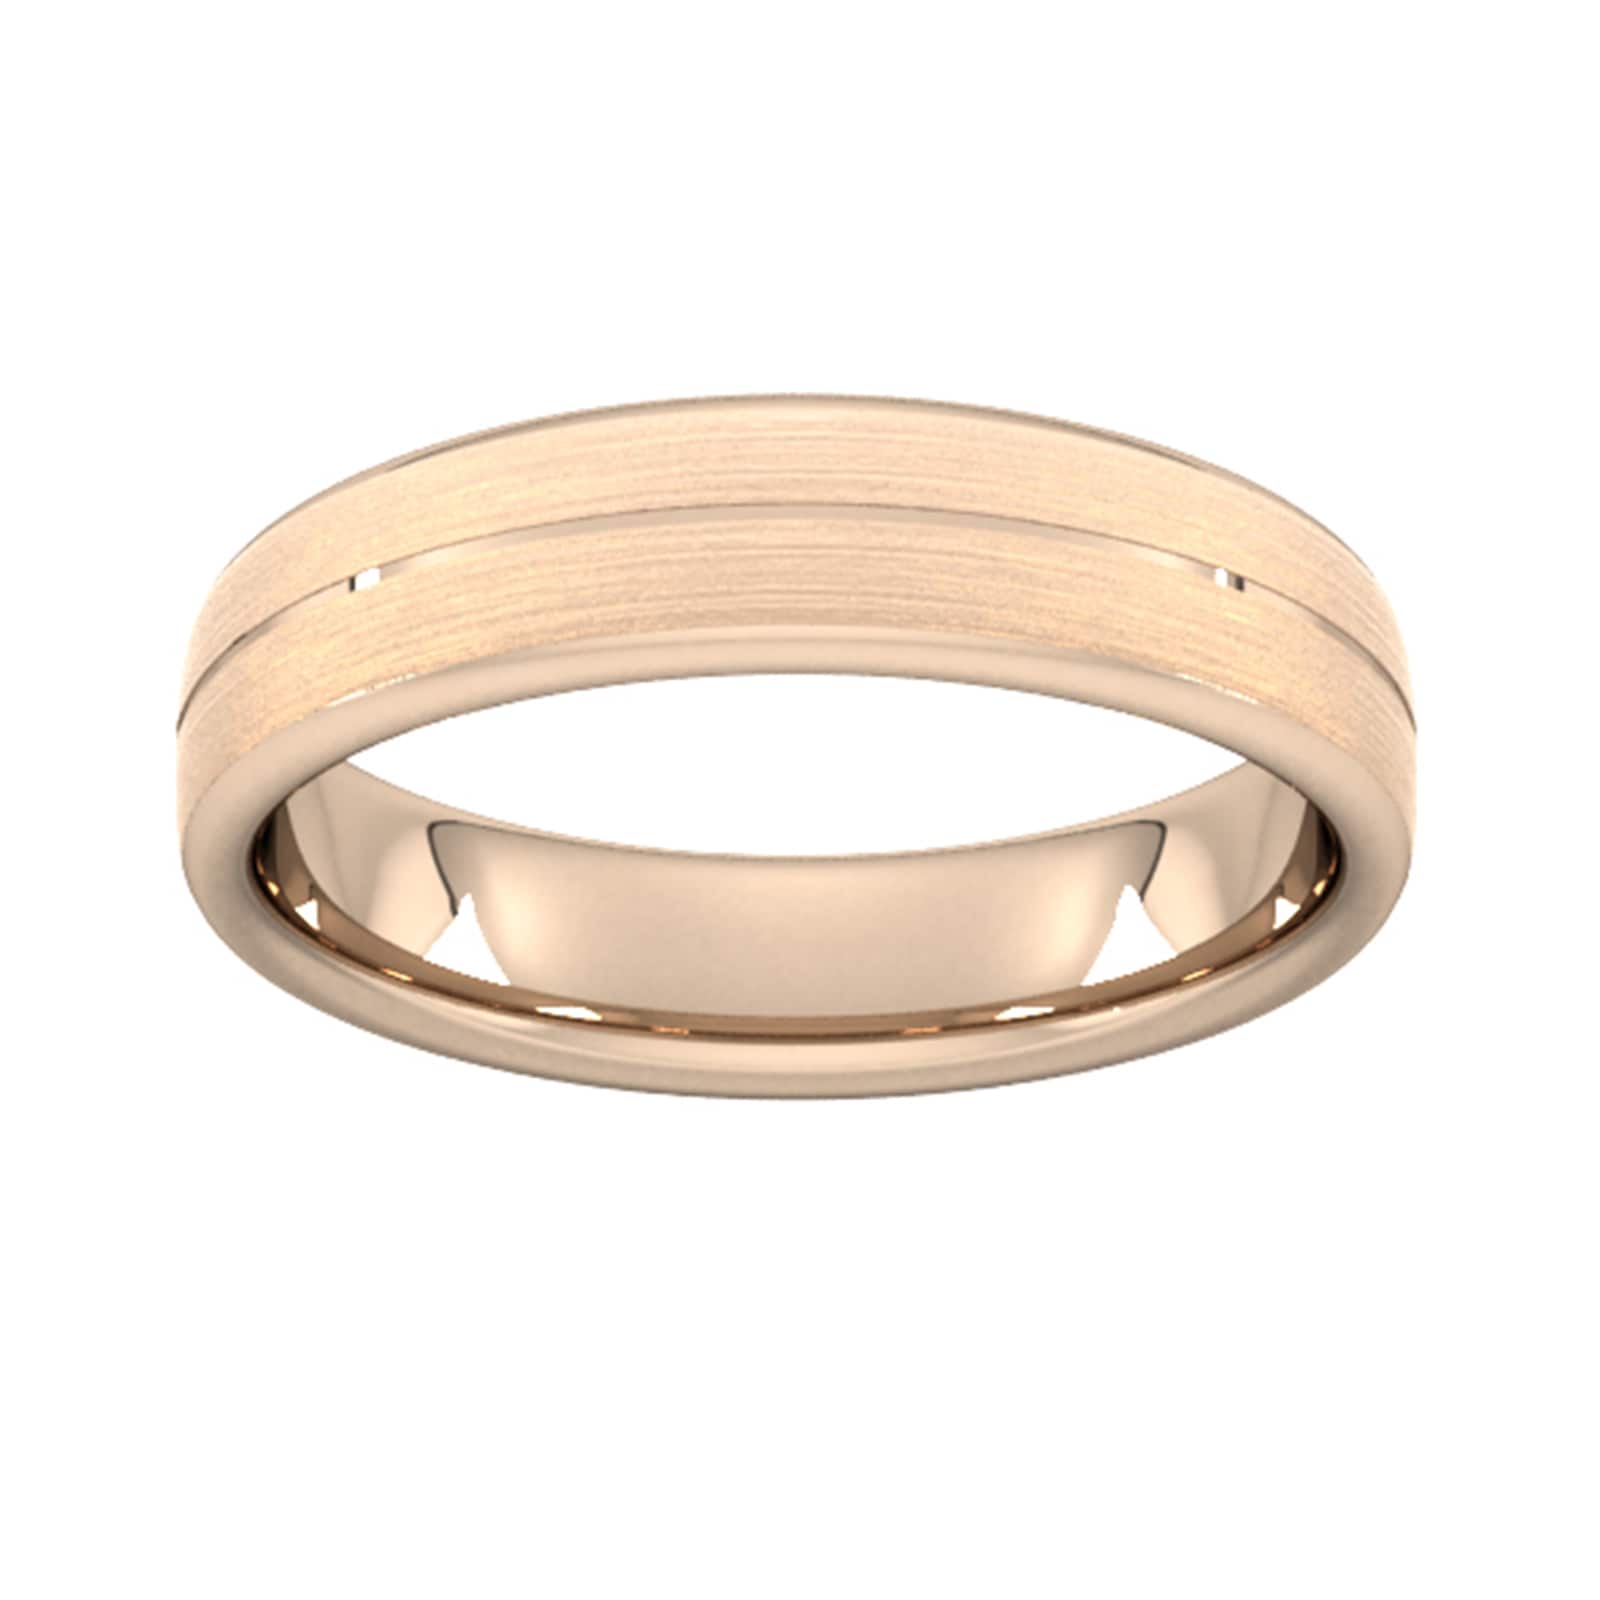 5mm D Shape Standard Centre Groove With Chamfered Edge Wedding Ring In 9 Carat Rose Gold - Ring Size L